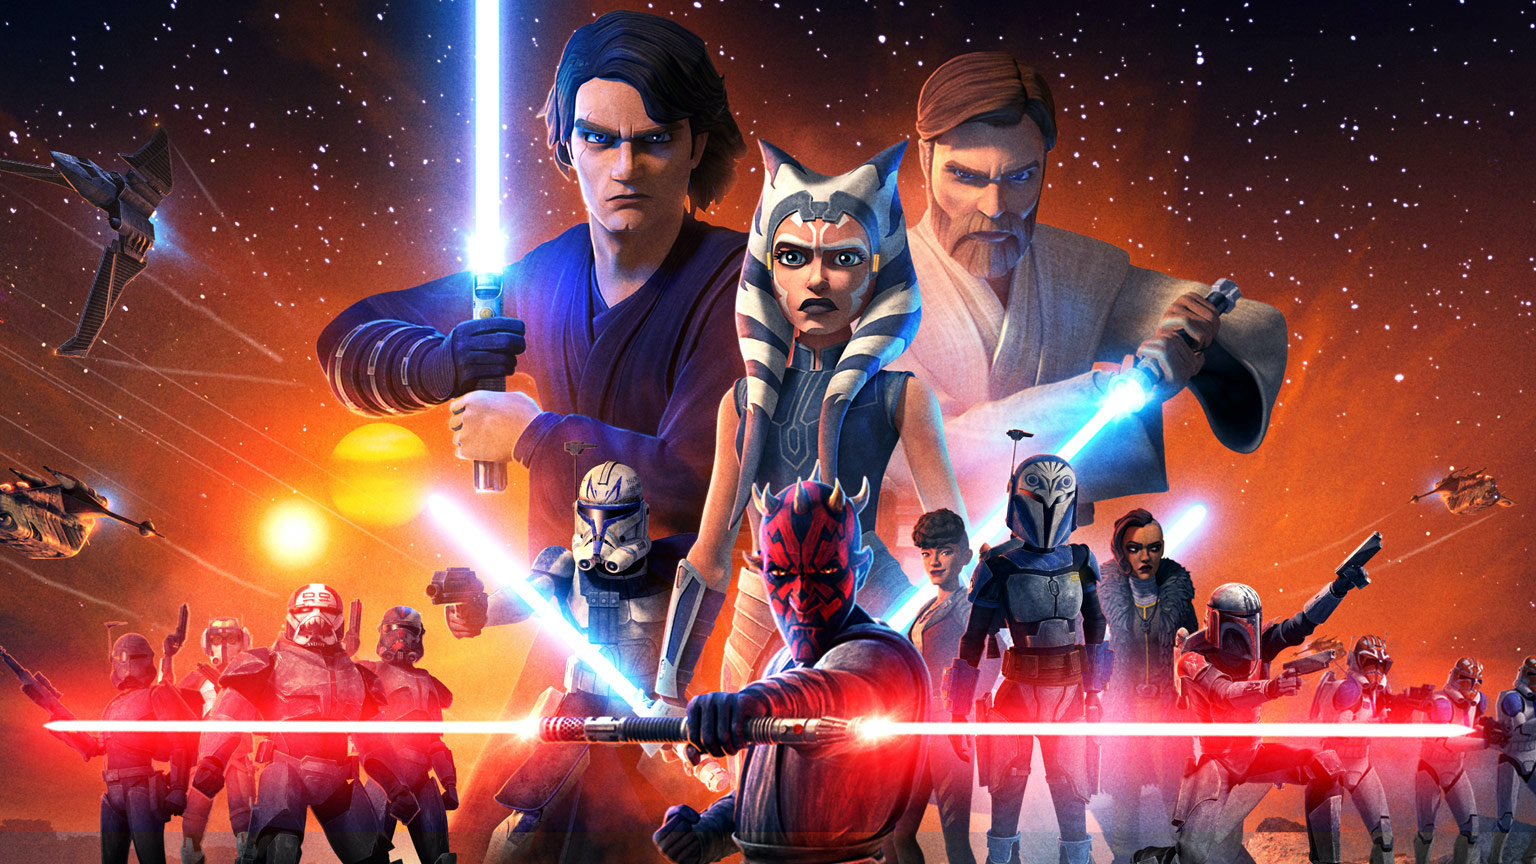 Please Help Me Figure Out How To Watch Star Wars: The Clone Wars